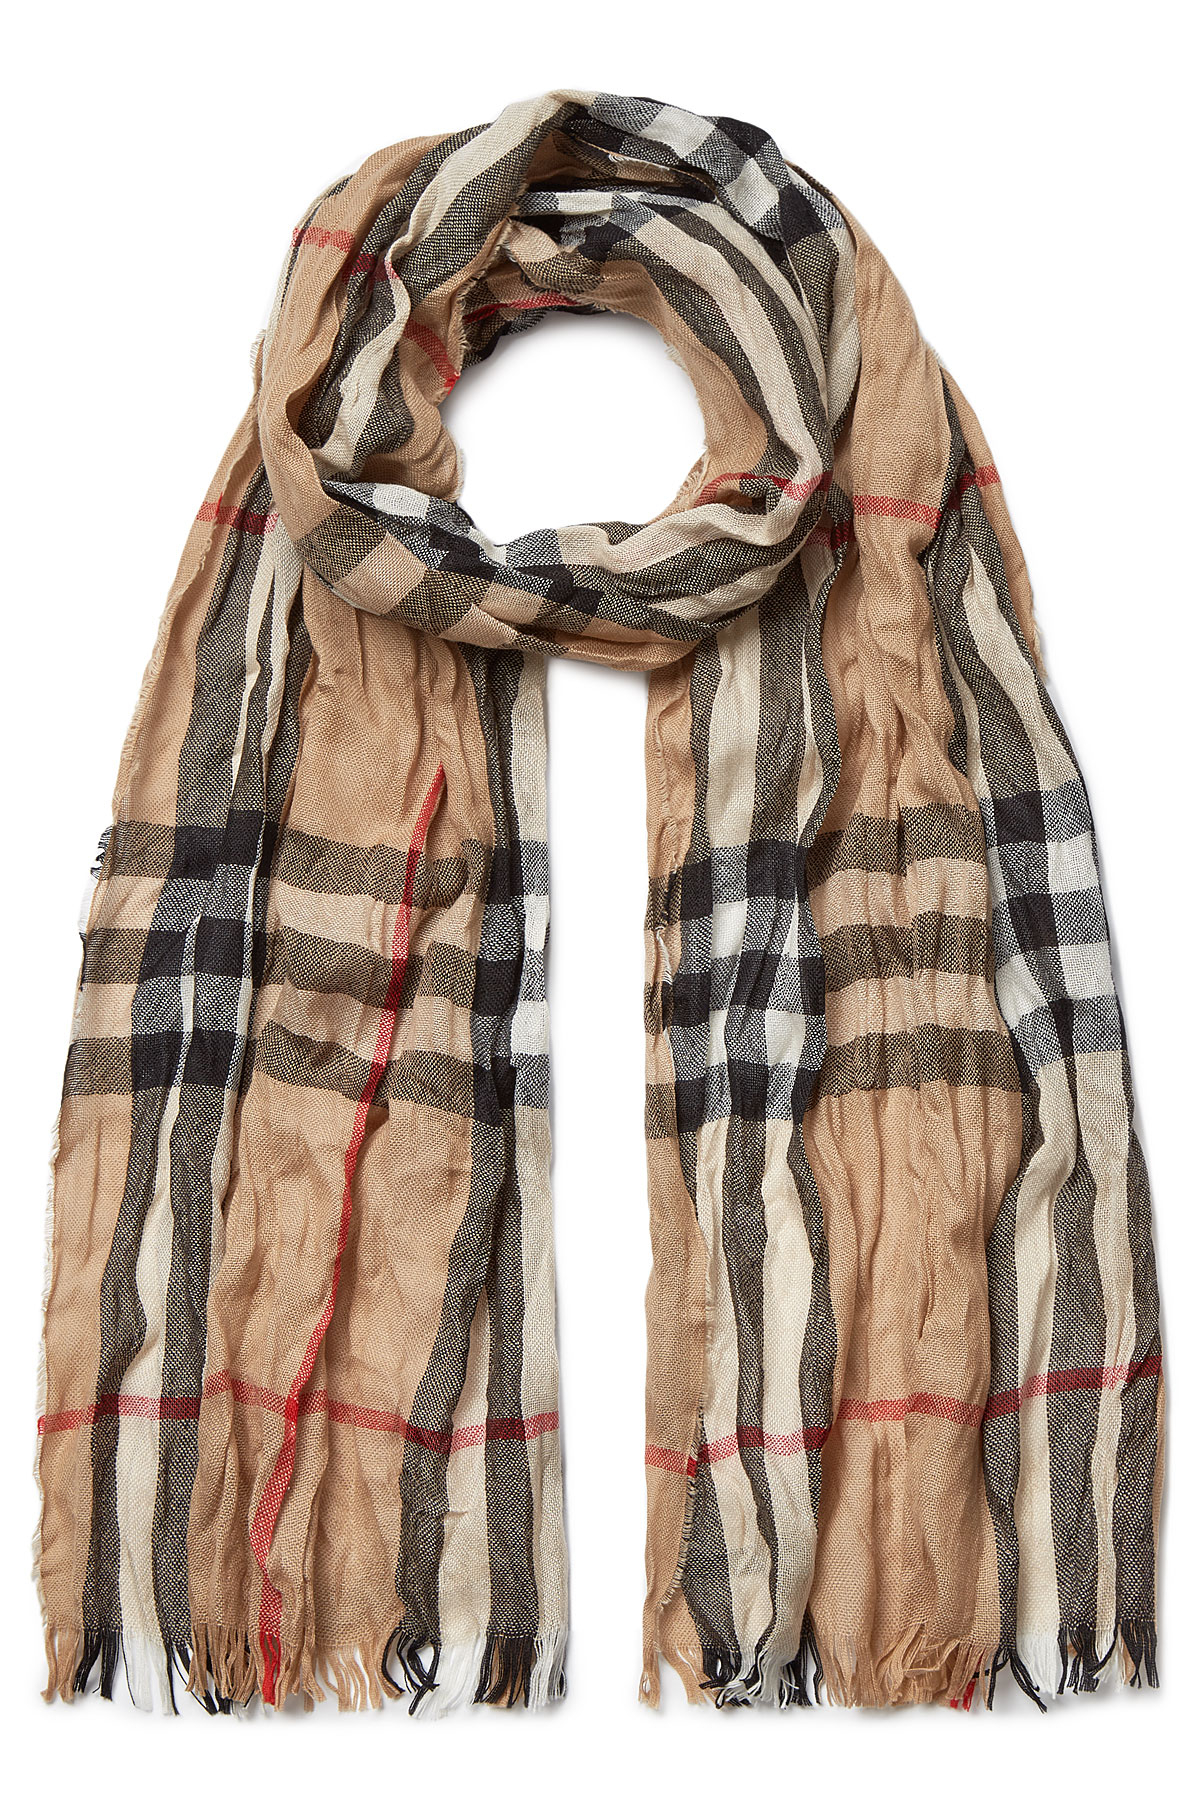 Burberry Wool-cashmere Giant Check Crinkle Scarf in Multicolor for Men